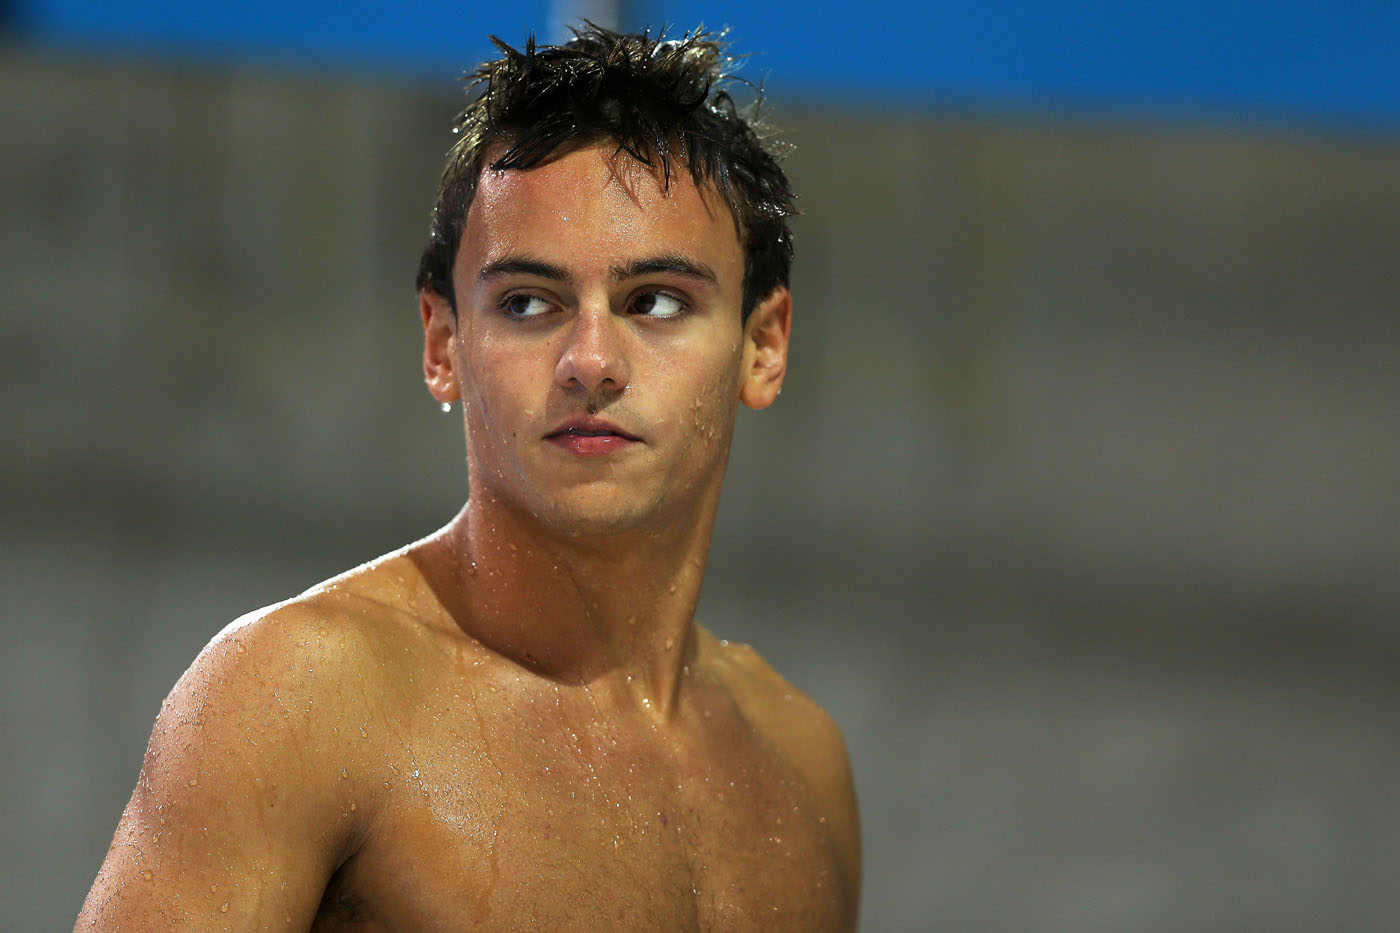 Tom Daley came Fourth at the London Olympics 2012.